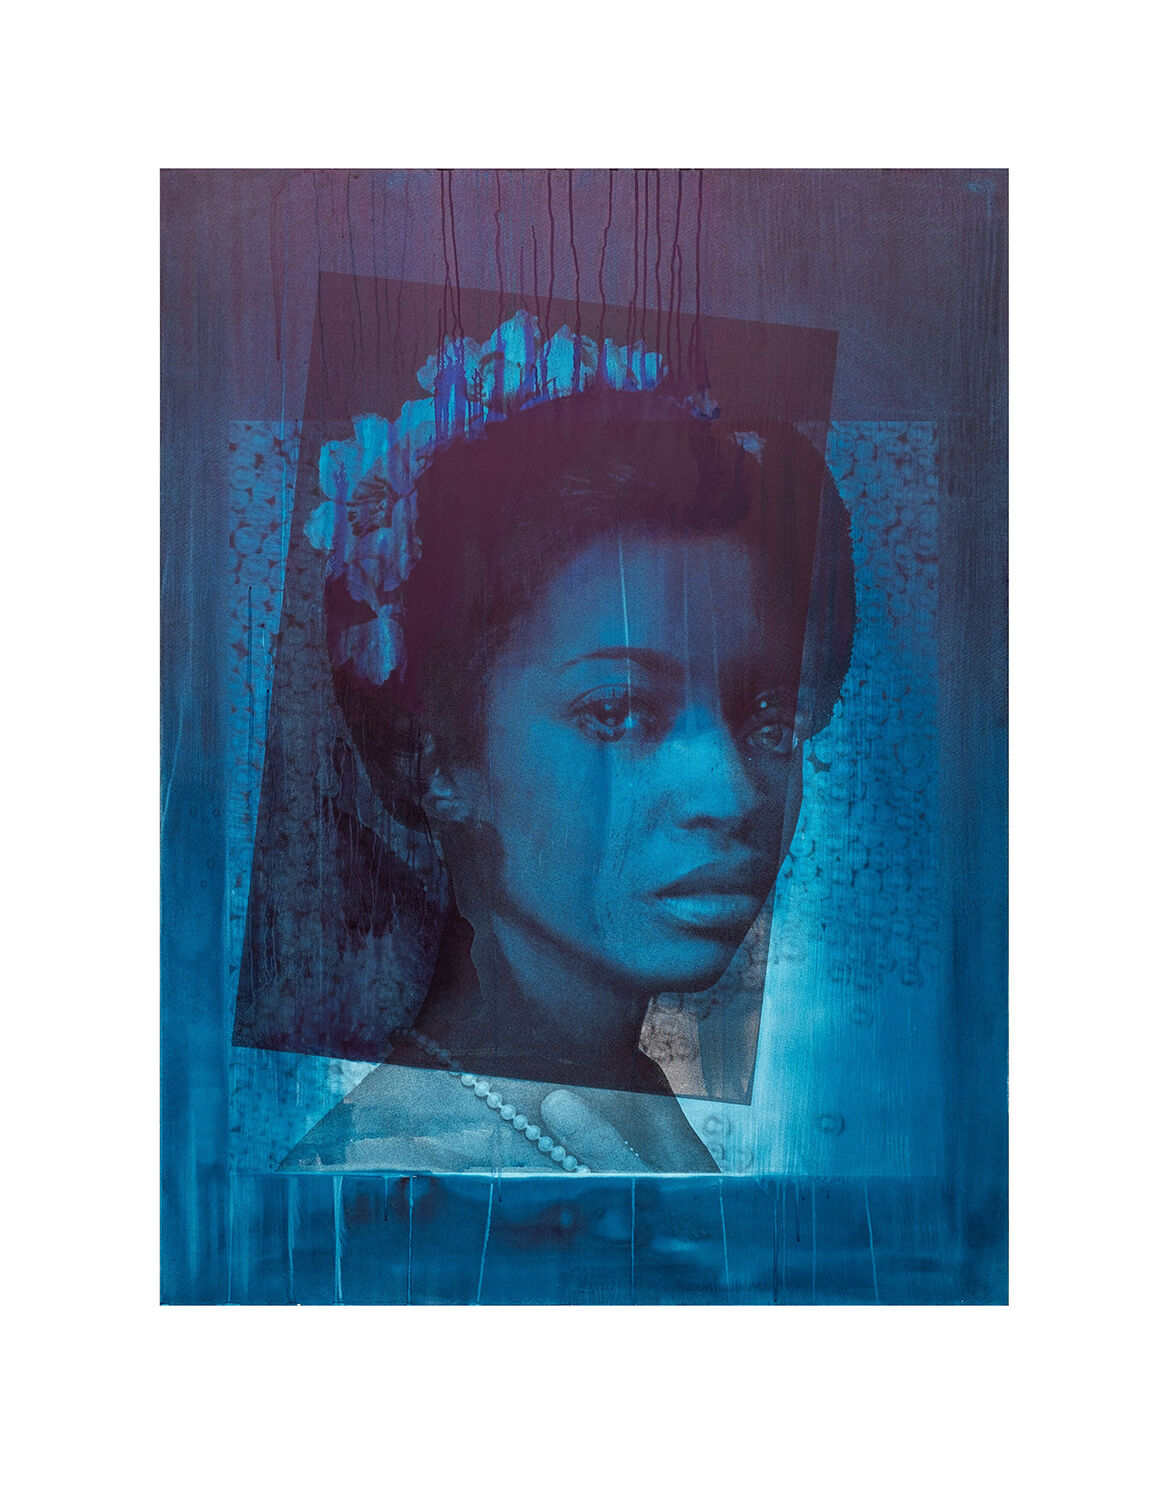 Lorna Simpson, Night Dreams, 2020. © Lorna Simpson. Photo by James Wang. Courtesy of the artist, Hauser &amp; Wirth, and Arthur Lewis.